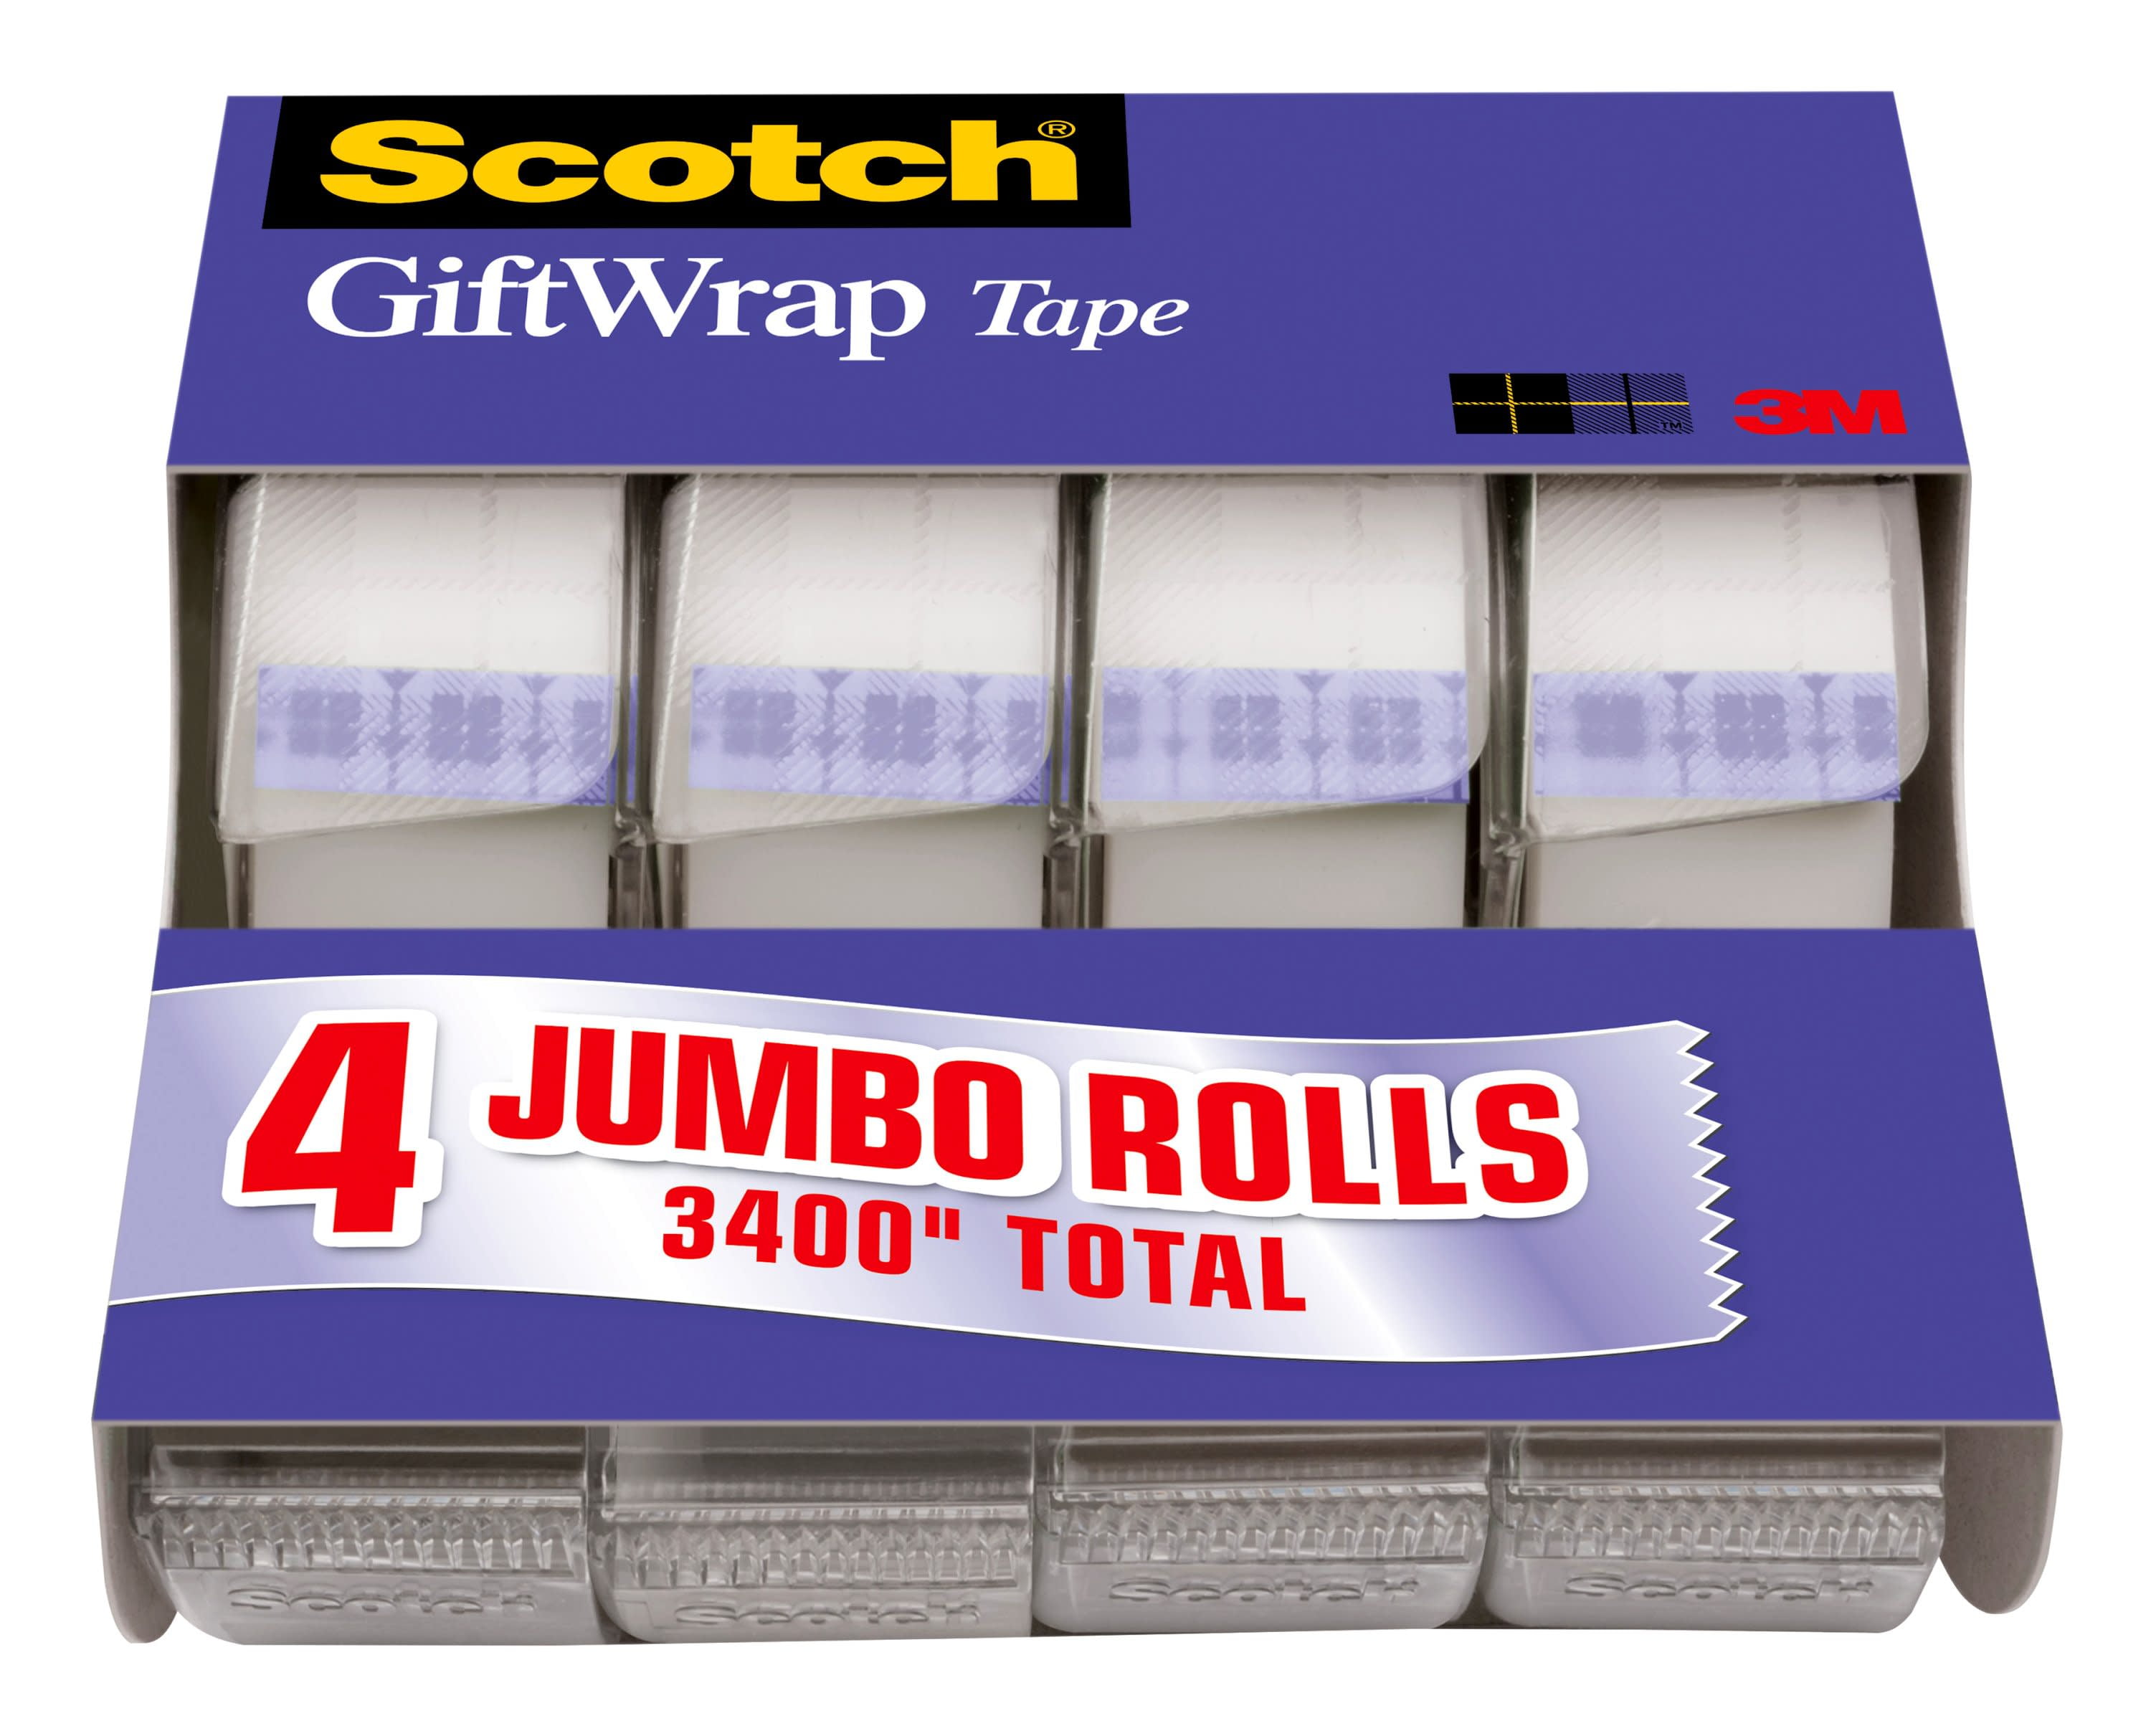 The Go-to Tape for The Holidays 615-GW 3/4 x 650 Inches Dispensered Scotch Gift Wrap Tape Pack of 1 6 Rolls 